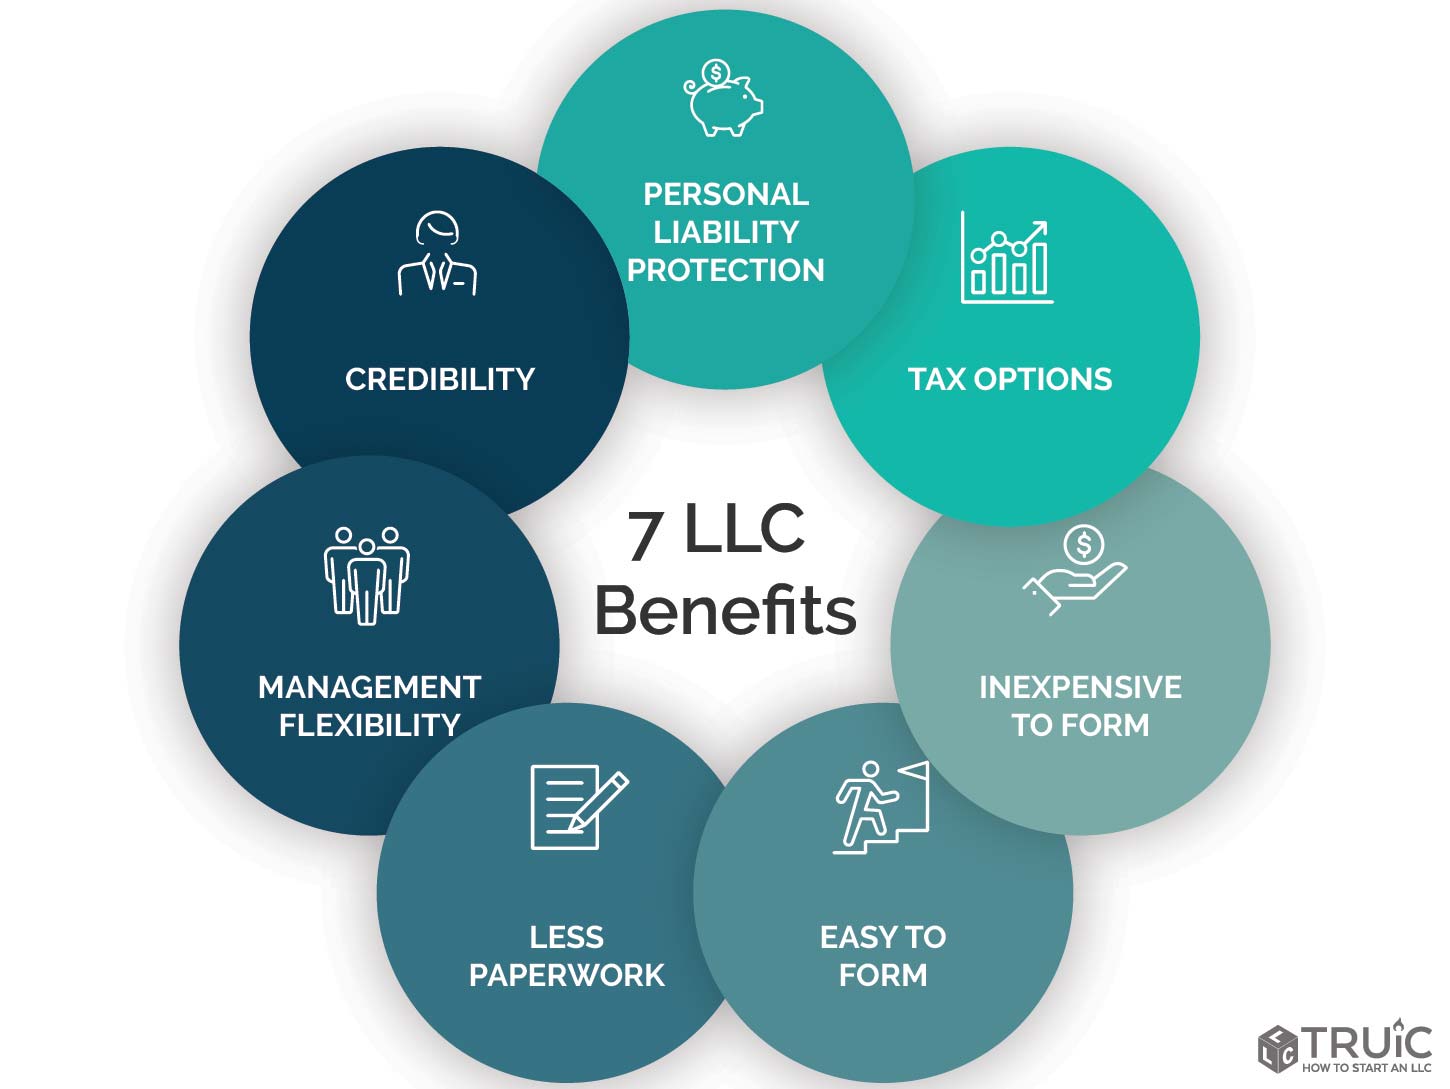 7 LLC Benefits infographic: Personal Liability Protection, Tax Options, Inexpensive to Form, Easy to Form, Less Paperwork, Management Flexibility, and Credibility. s